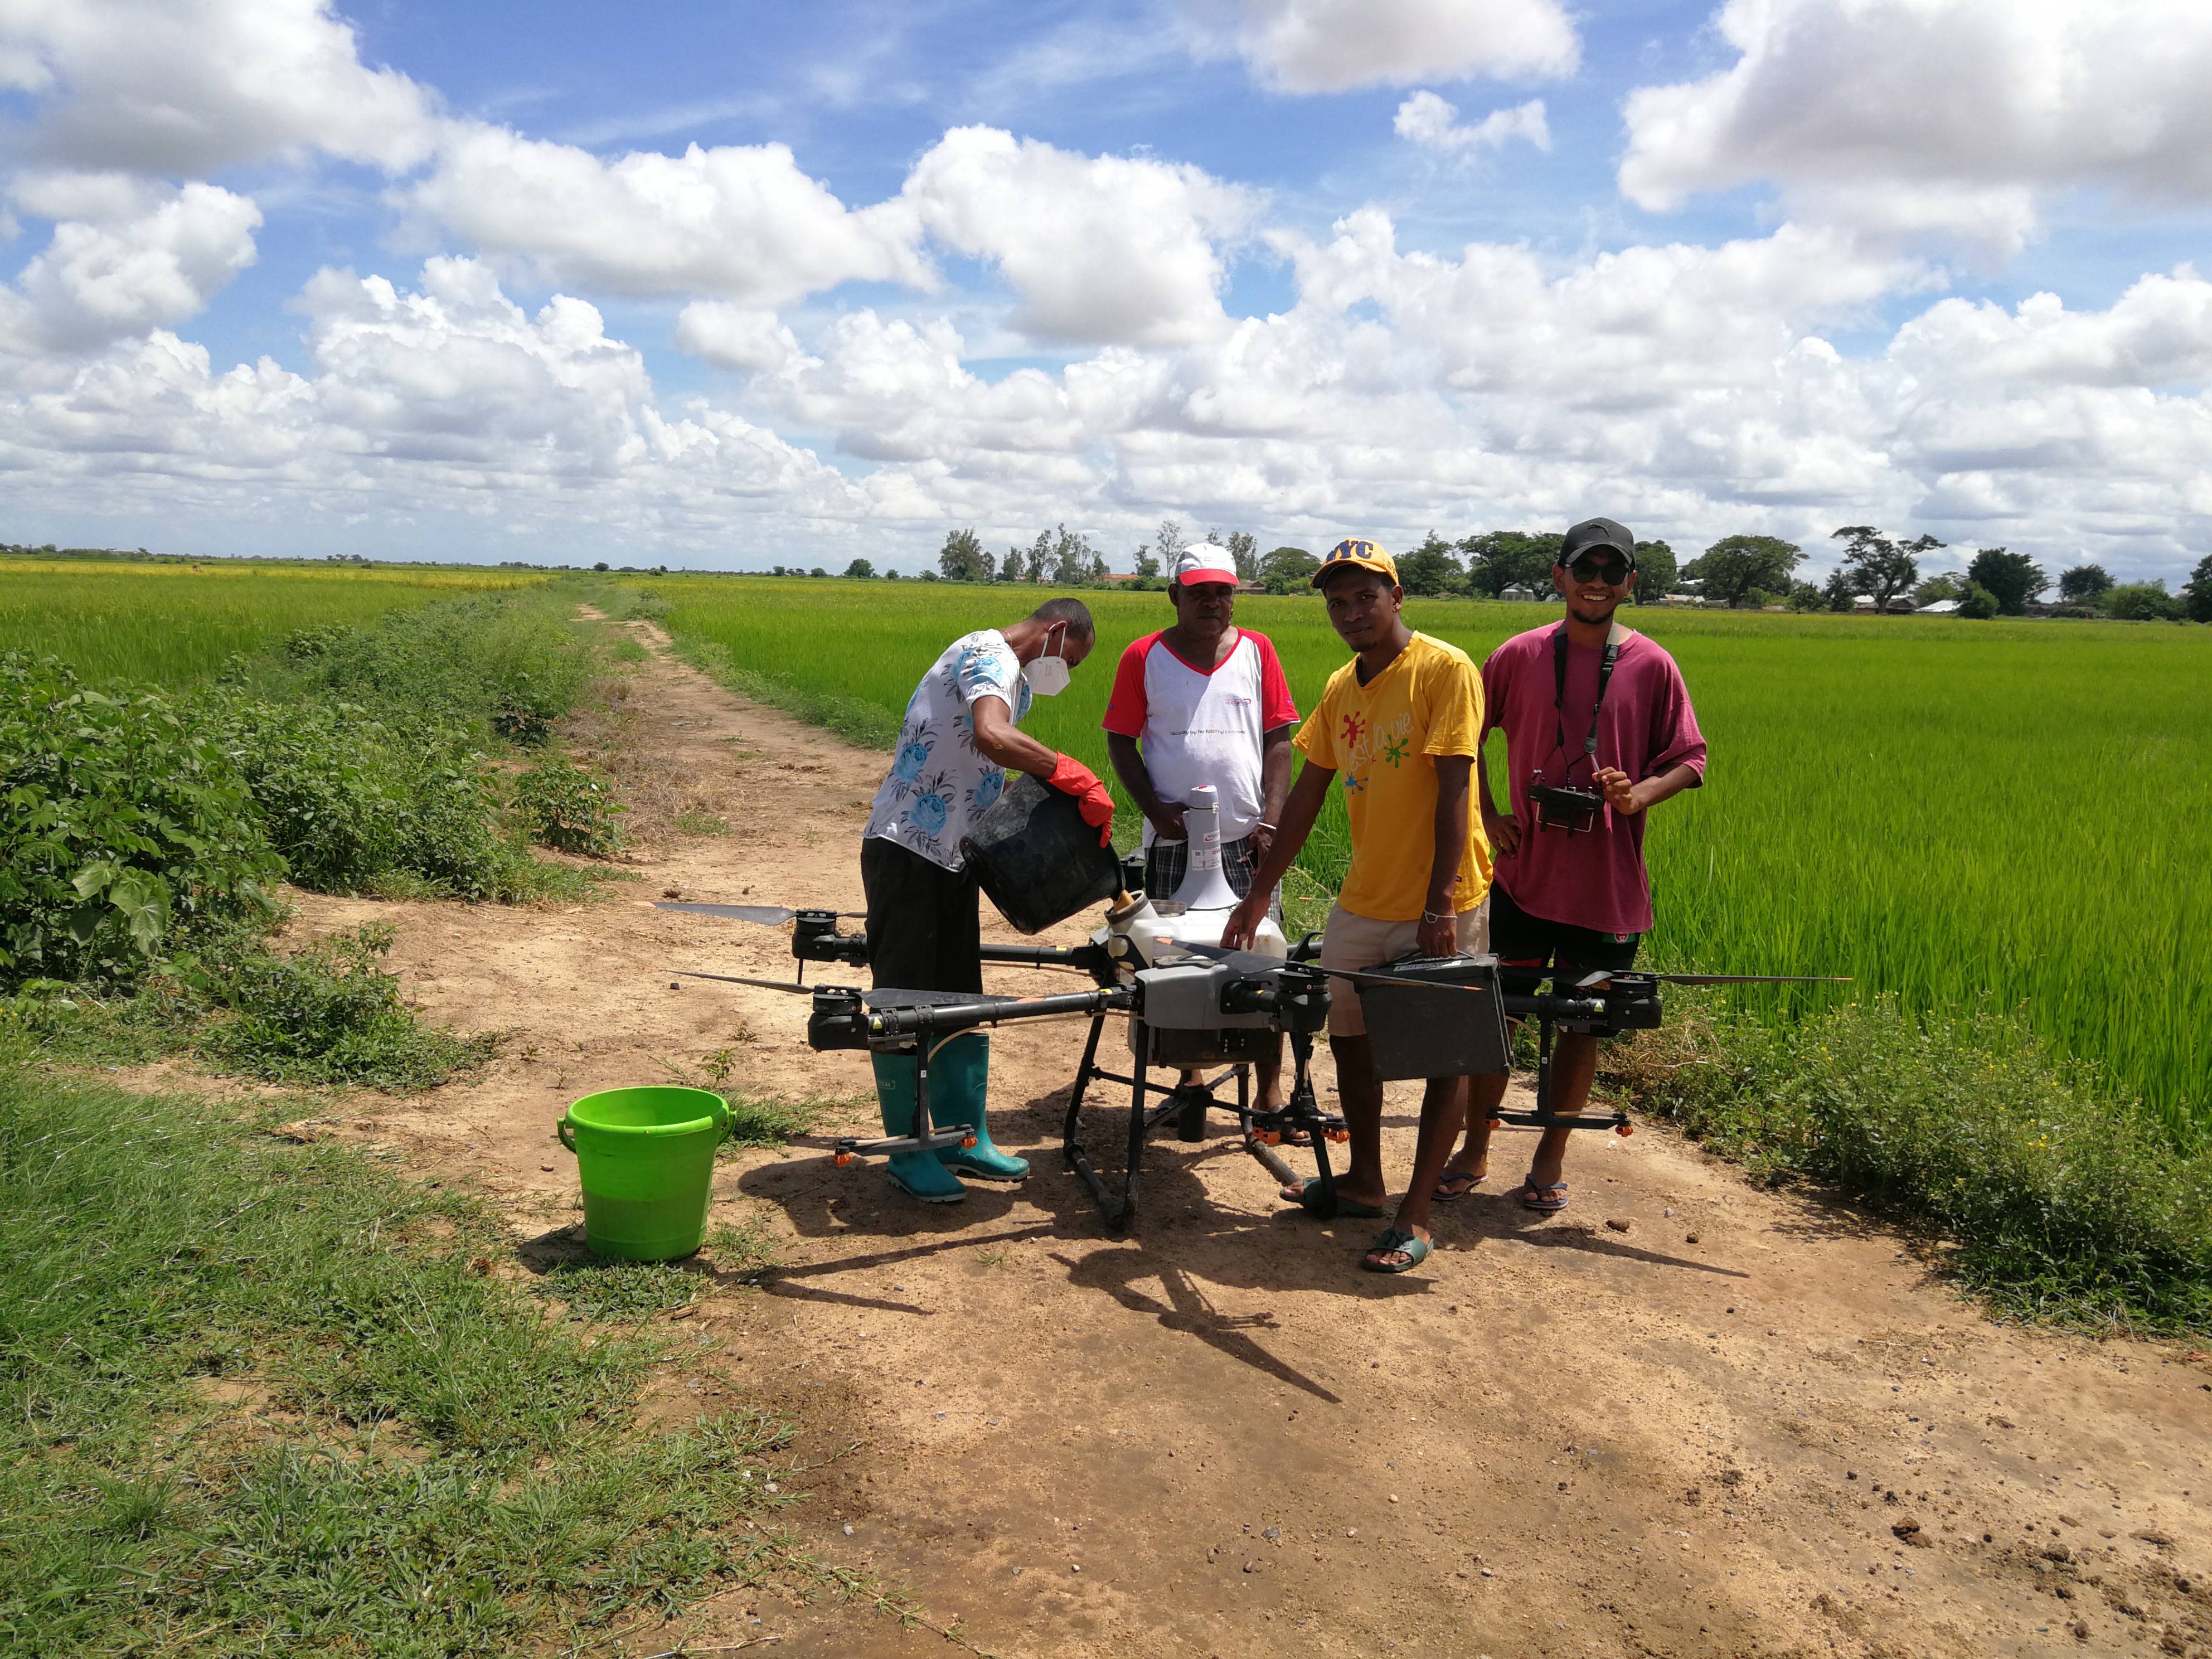 Edmond accompanied the drone pilots Fenohasina and Manjaka in his area to support the spraying.